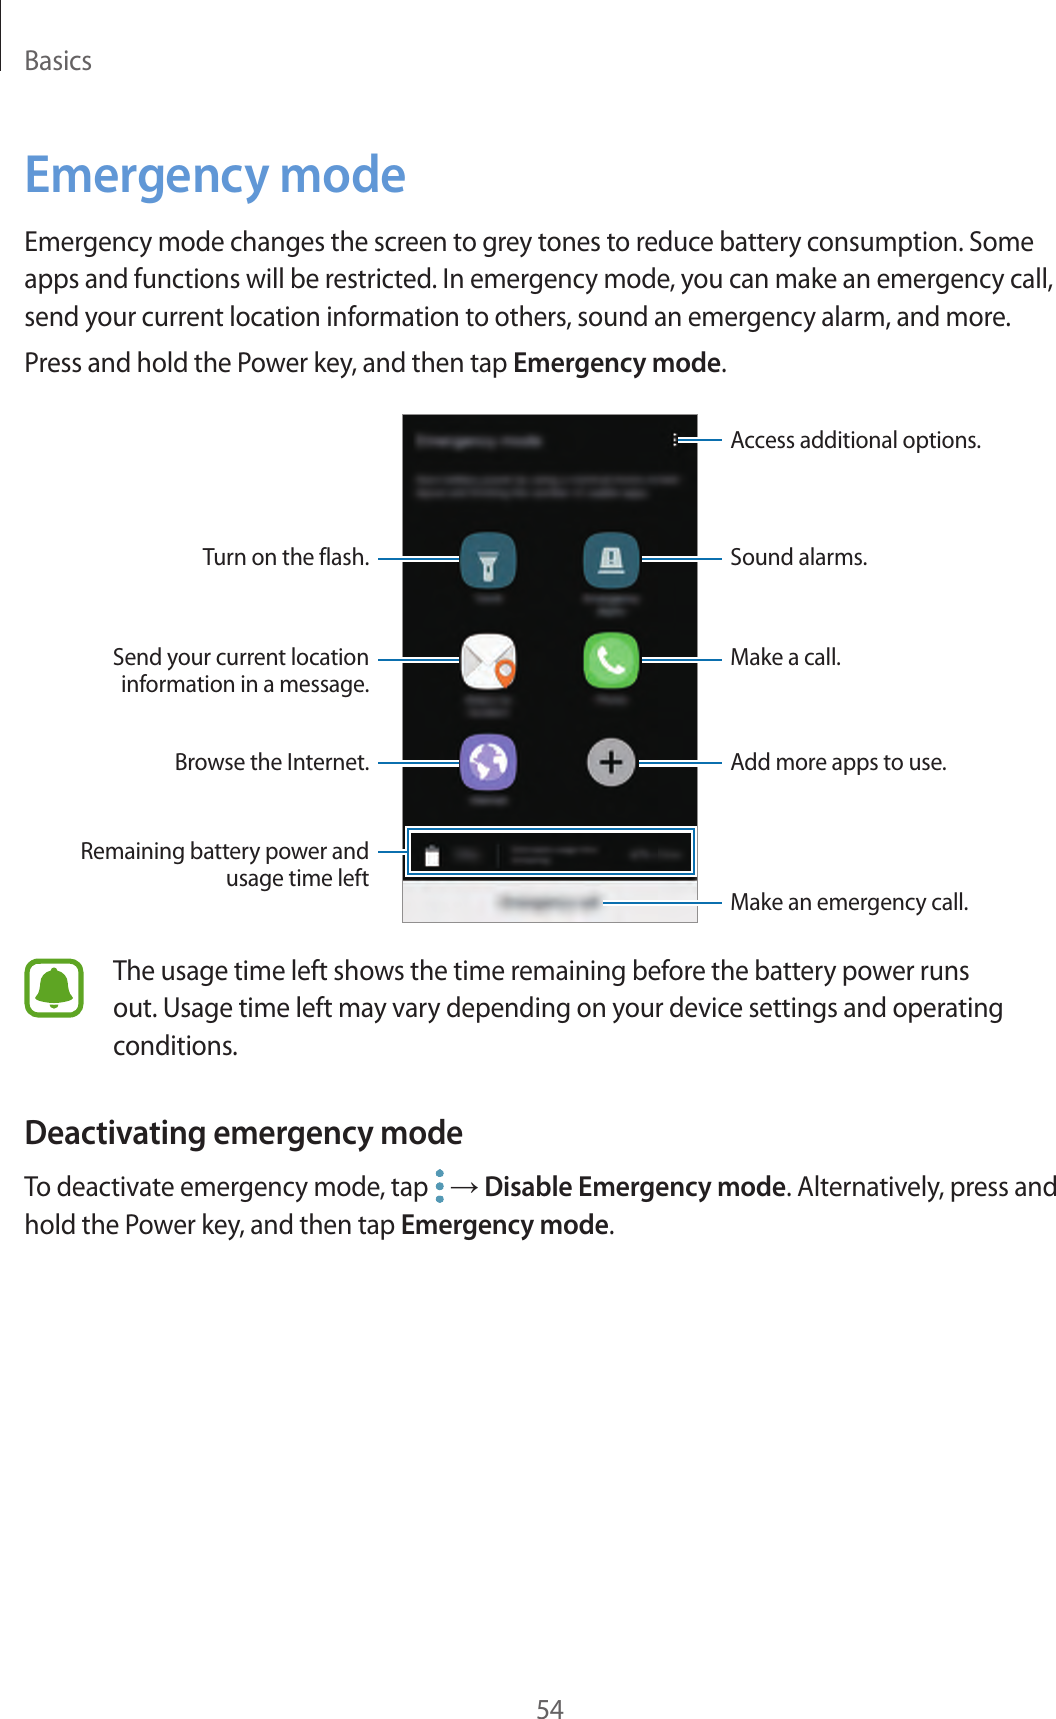 Basics54Emergency modeEmergency mode changes the screen to grey tones to reduce battery consumption. Some apps and functions will be restricted. In emergency mode, you can make an emergency call, send your current location information to others, sound an emergency alarm, and more.Press and hold the Power key, and then tap Emergency mode.Add more apps to use.Make an emergency call.Remaining battery power and usage time leftTurn on the flash.Make a call.Send your current location information in a message.Browse the Internet.Access additional options.Sound alarms.The usage time left shows the time remaining before the battery power runs out. Usage time left may vary depending on your device settings and operating conditions.Deactivating emergency modeTo deactivate emergency mode, tap   → Disable Emergency mode. Alternatively, press and hold the Power key, and then tap Emergency mode.